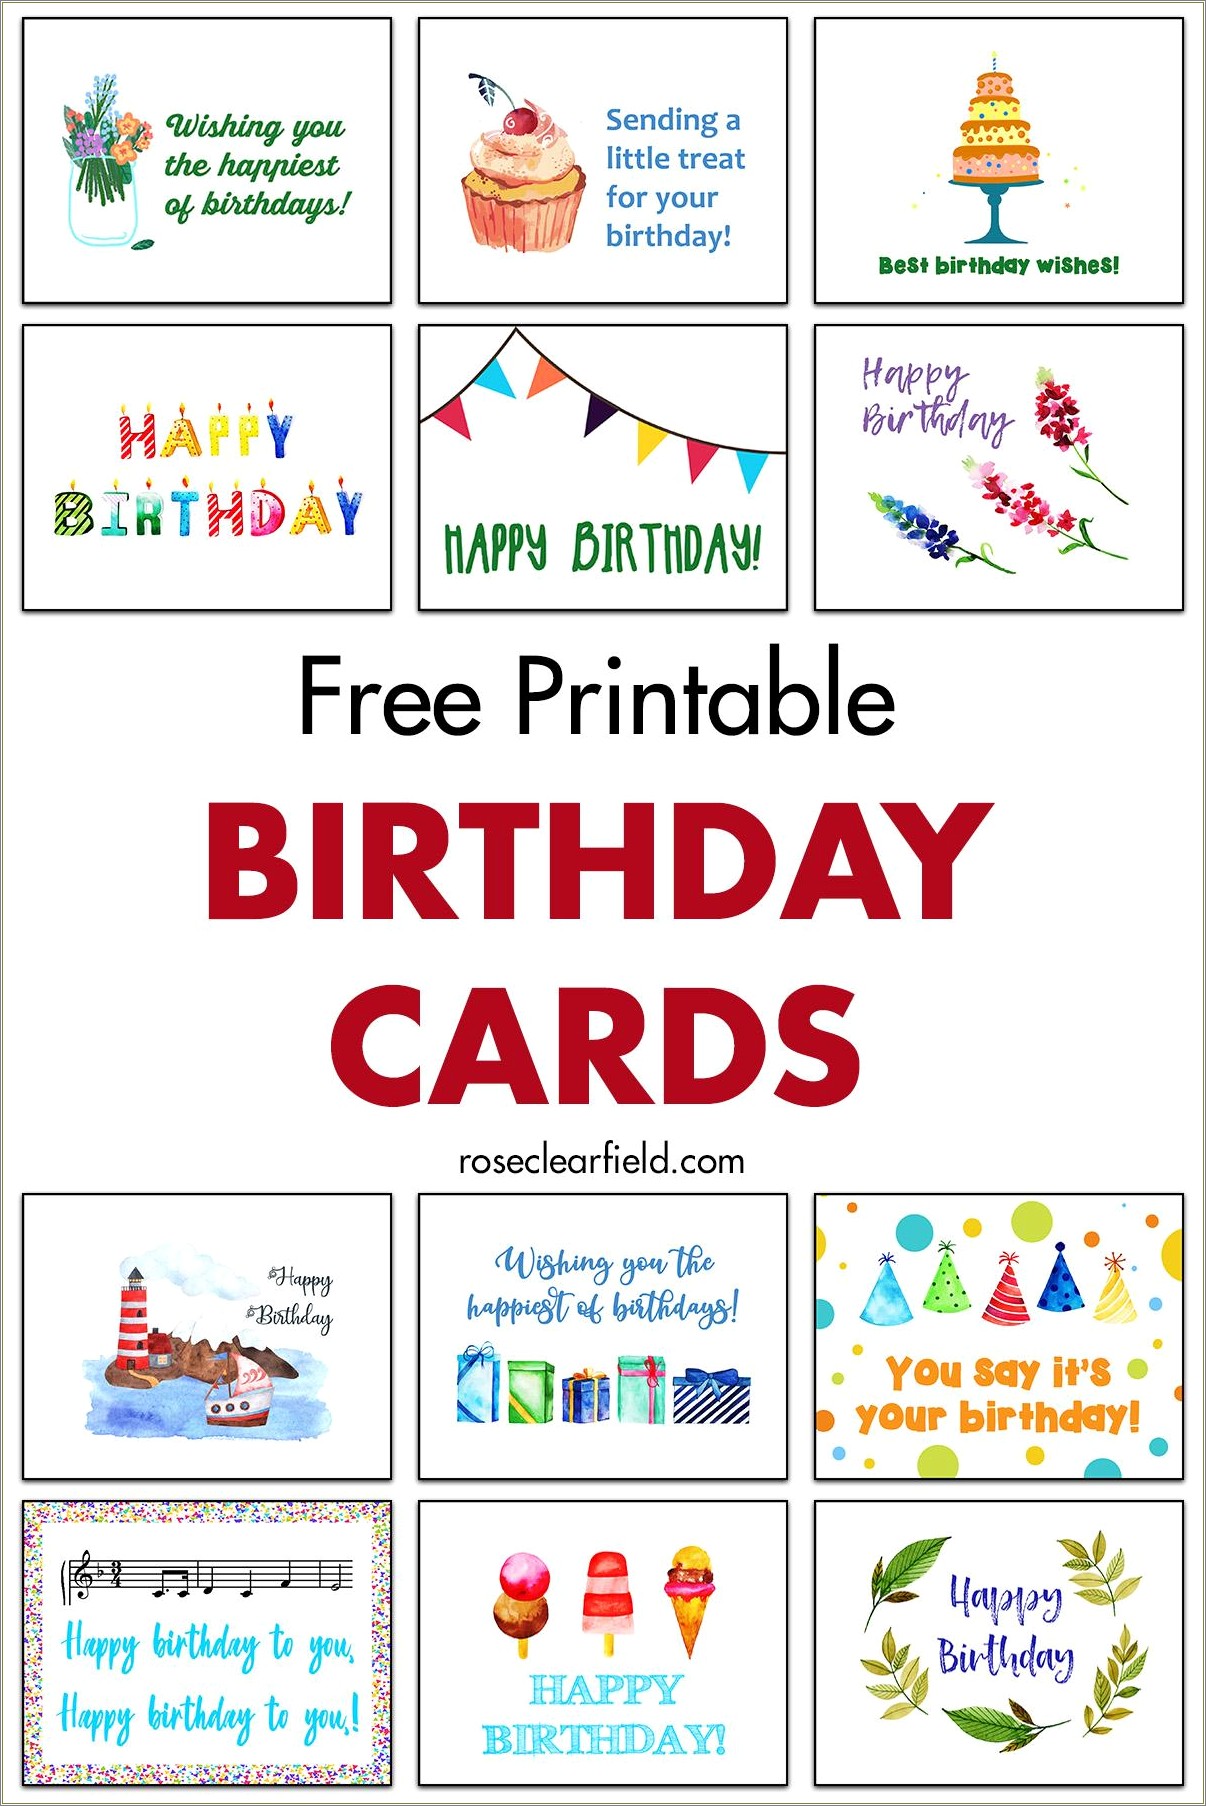 Free Birthday Card Templates For Husband